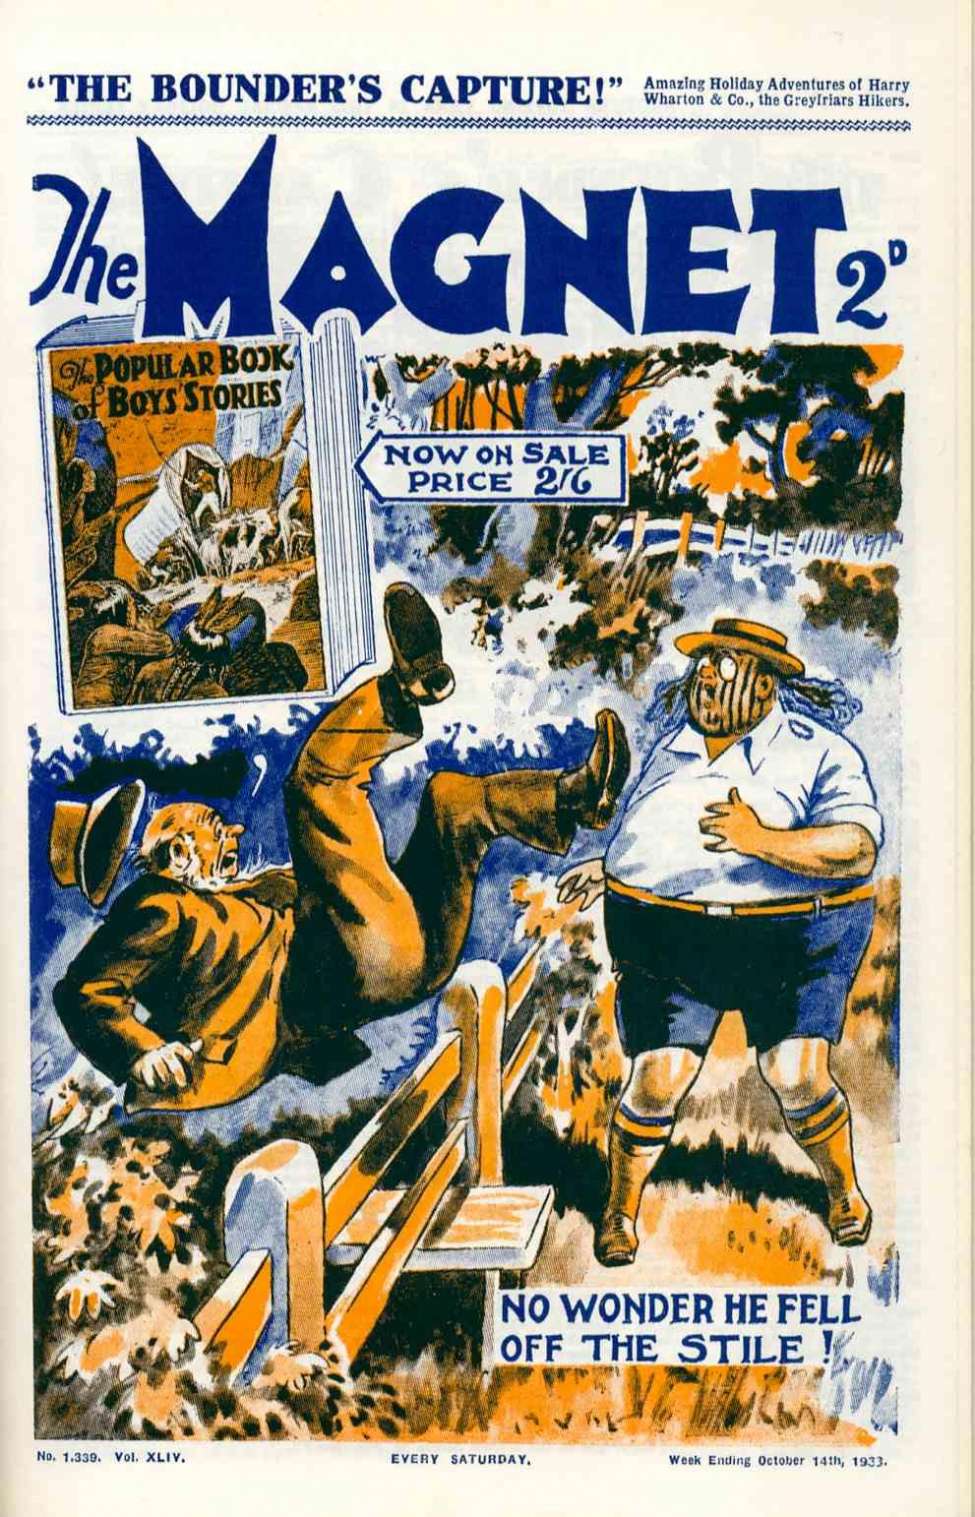 Book Cover For The Magnet 1339 - The Bounder's Capture!